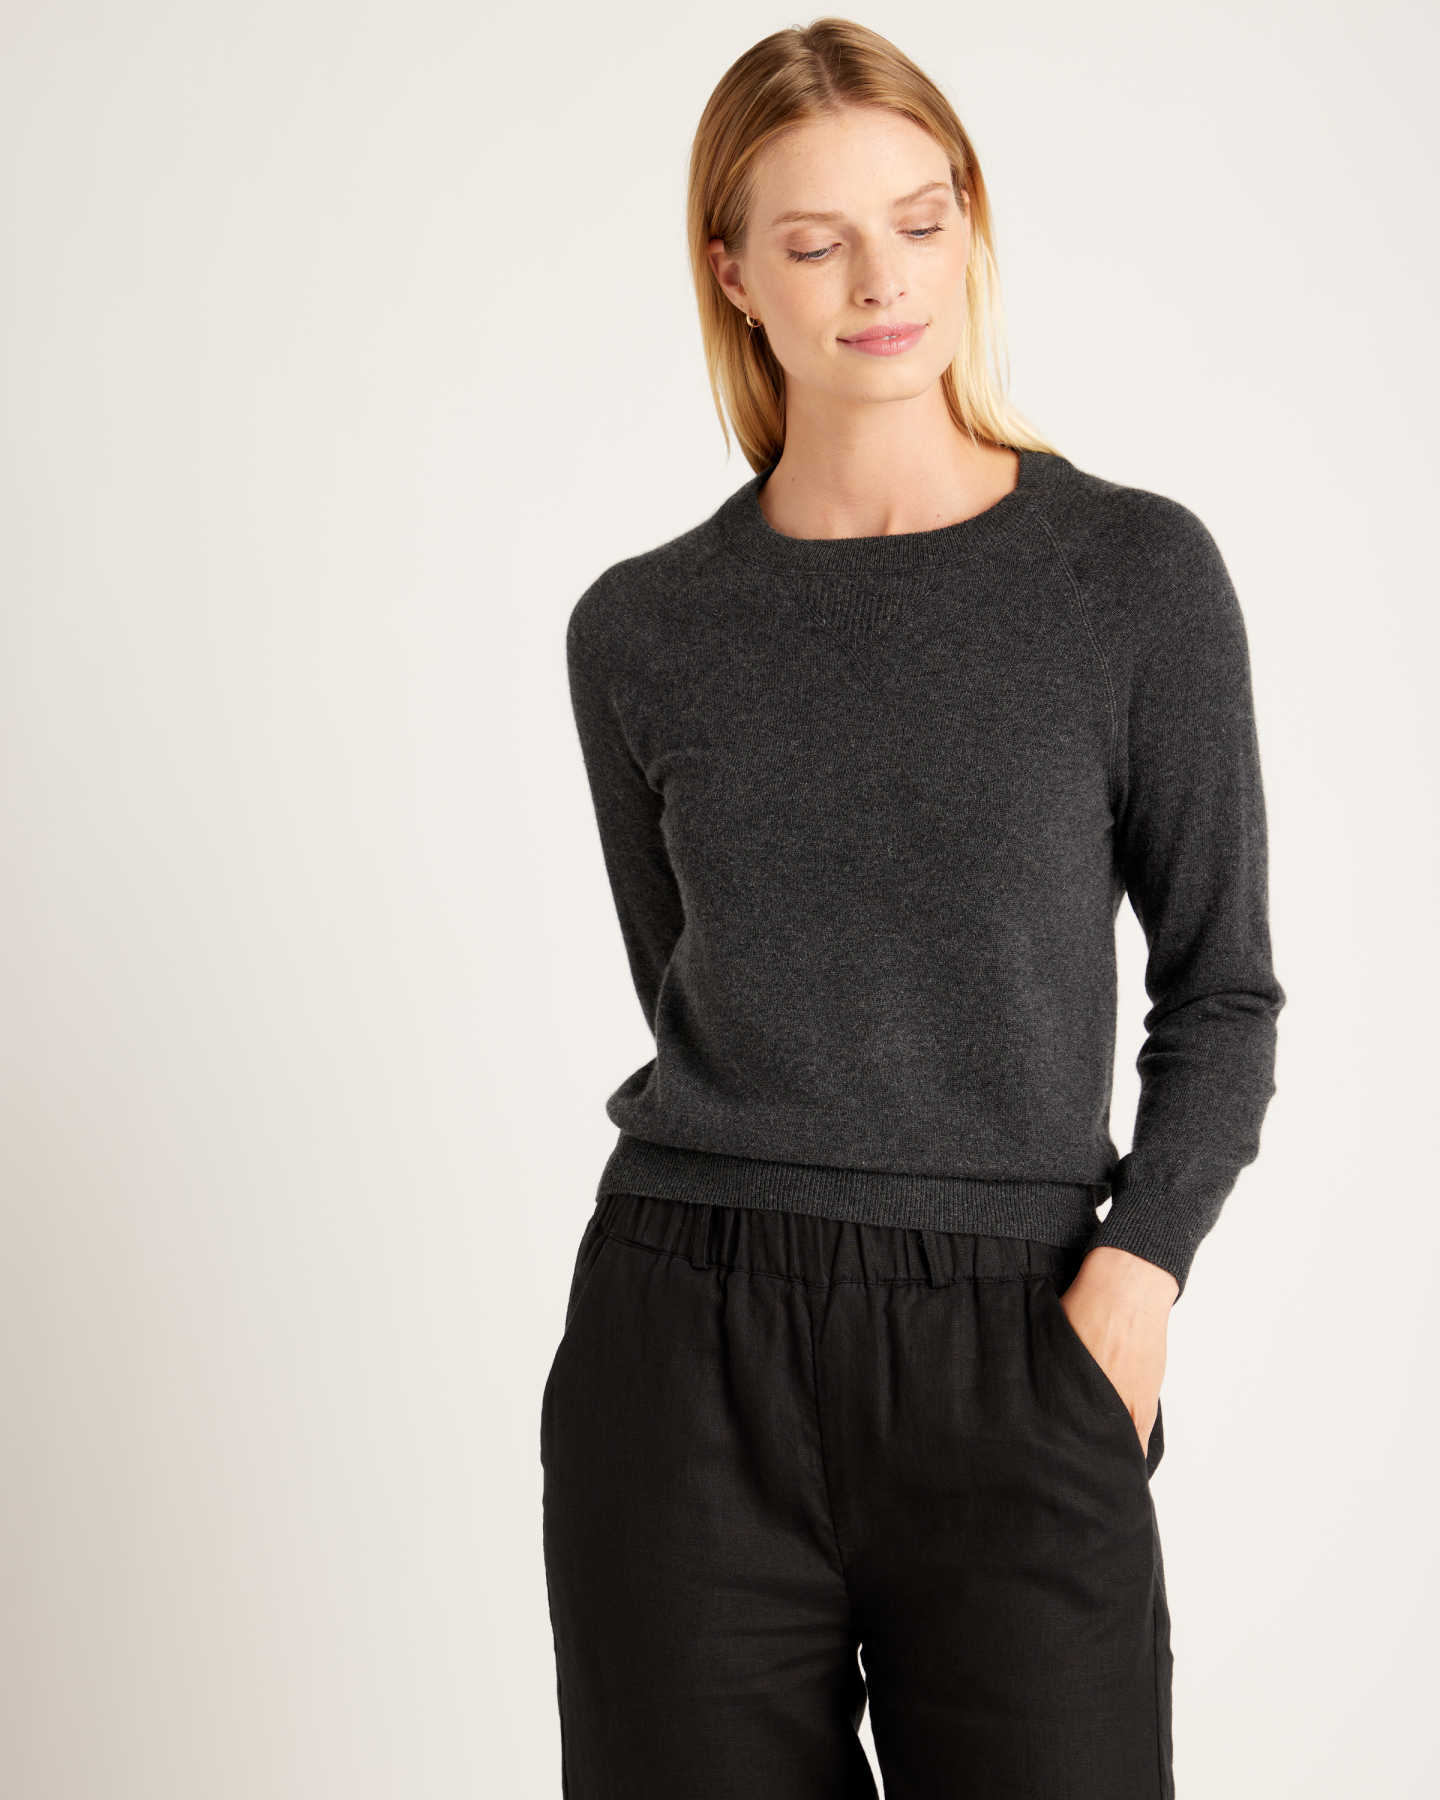 You May Also Like - Luxe Baby Cashmere Sweatshirt - Charcoal